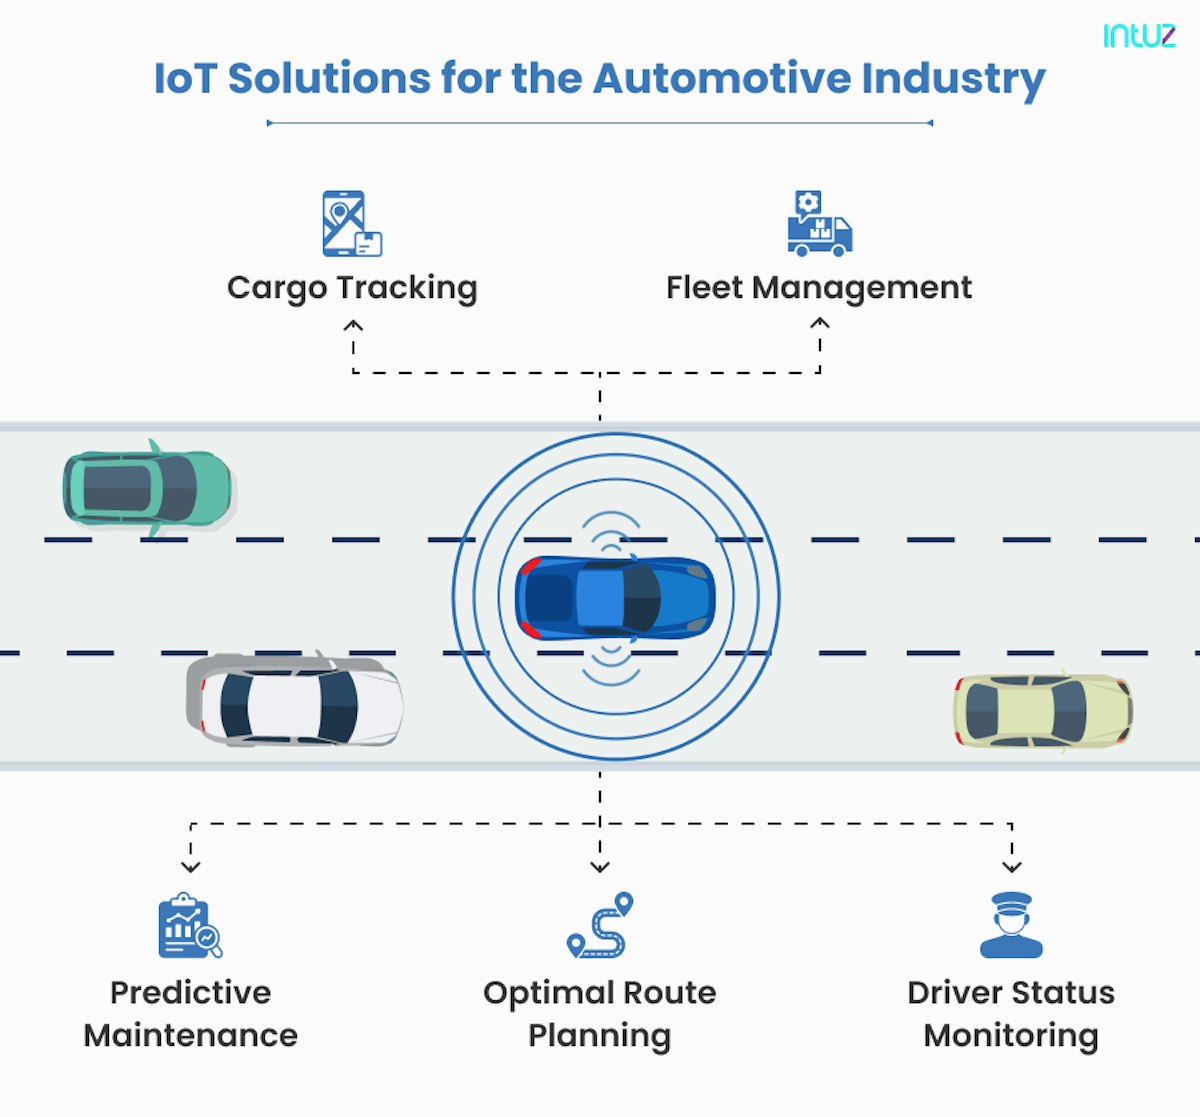 IoT solutions for the automotive industry